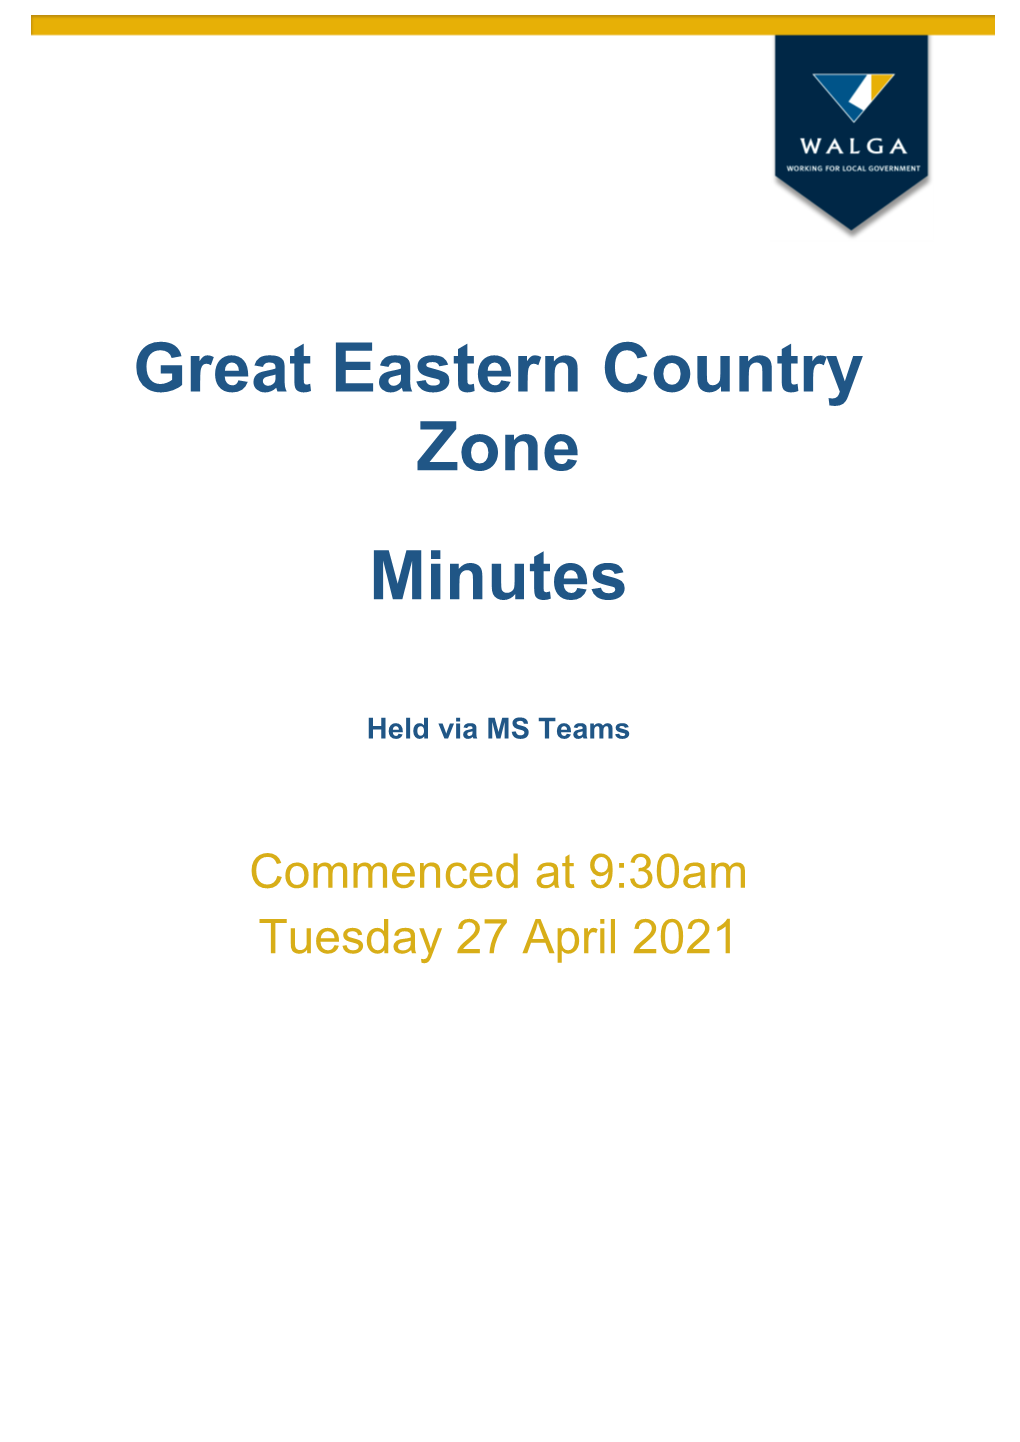 Great Eastern Country Zone Minutes